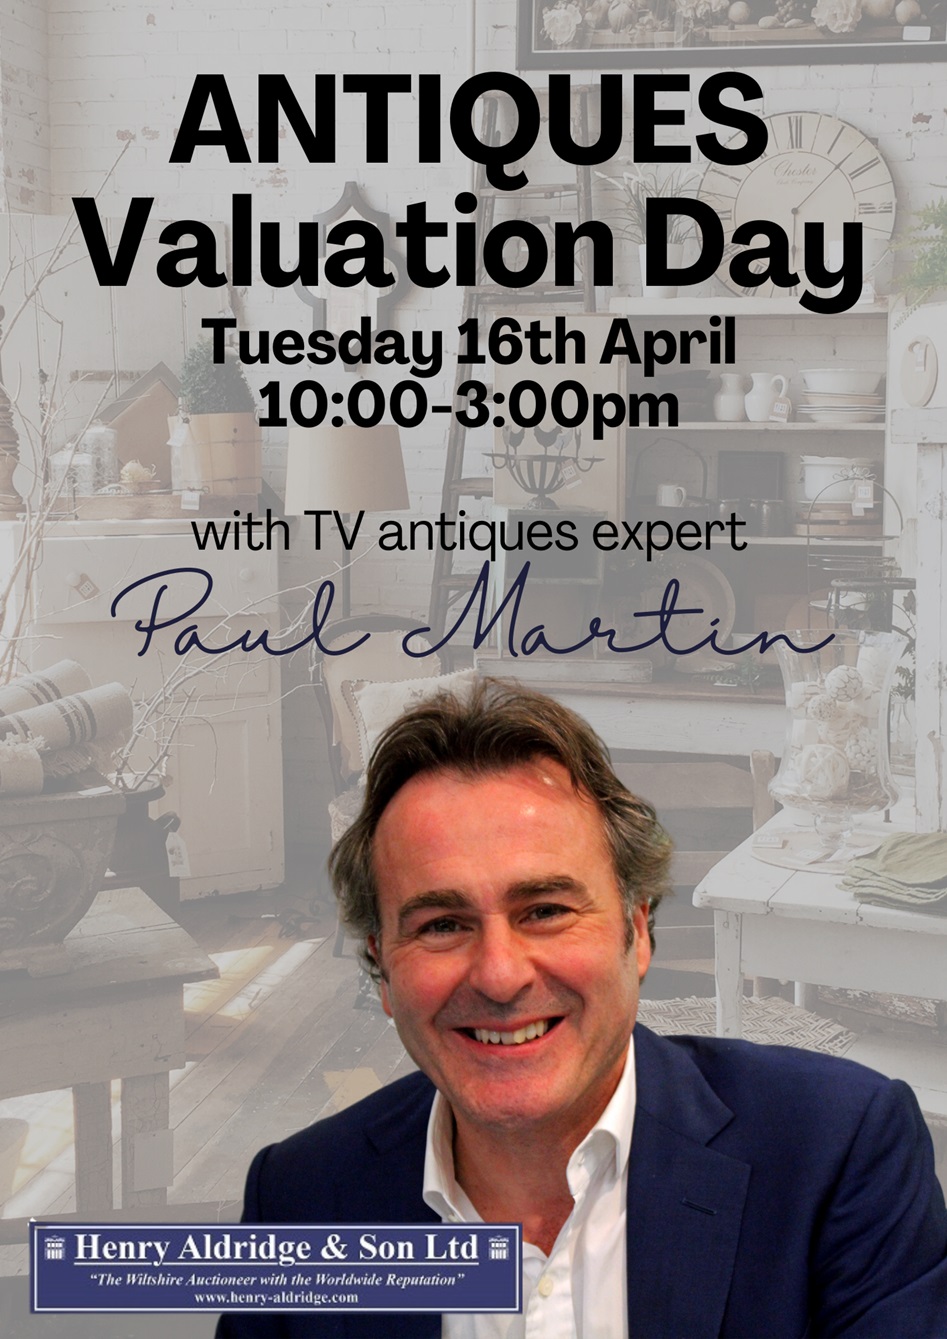 Antiques Valuation Day